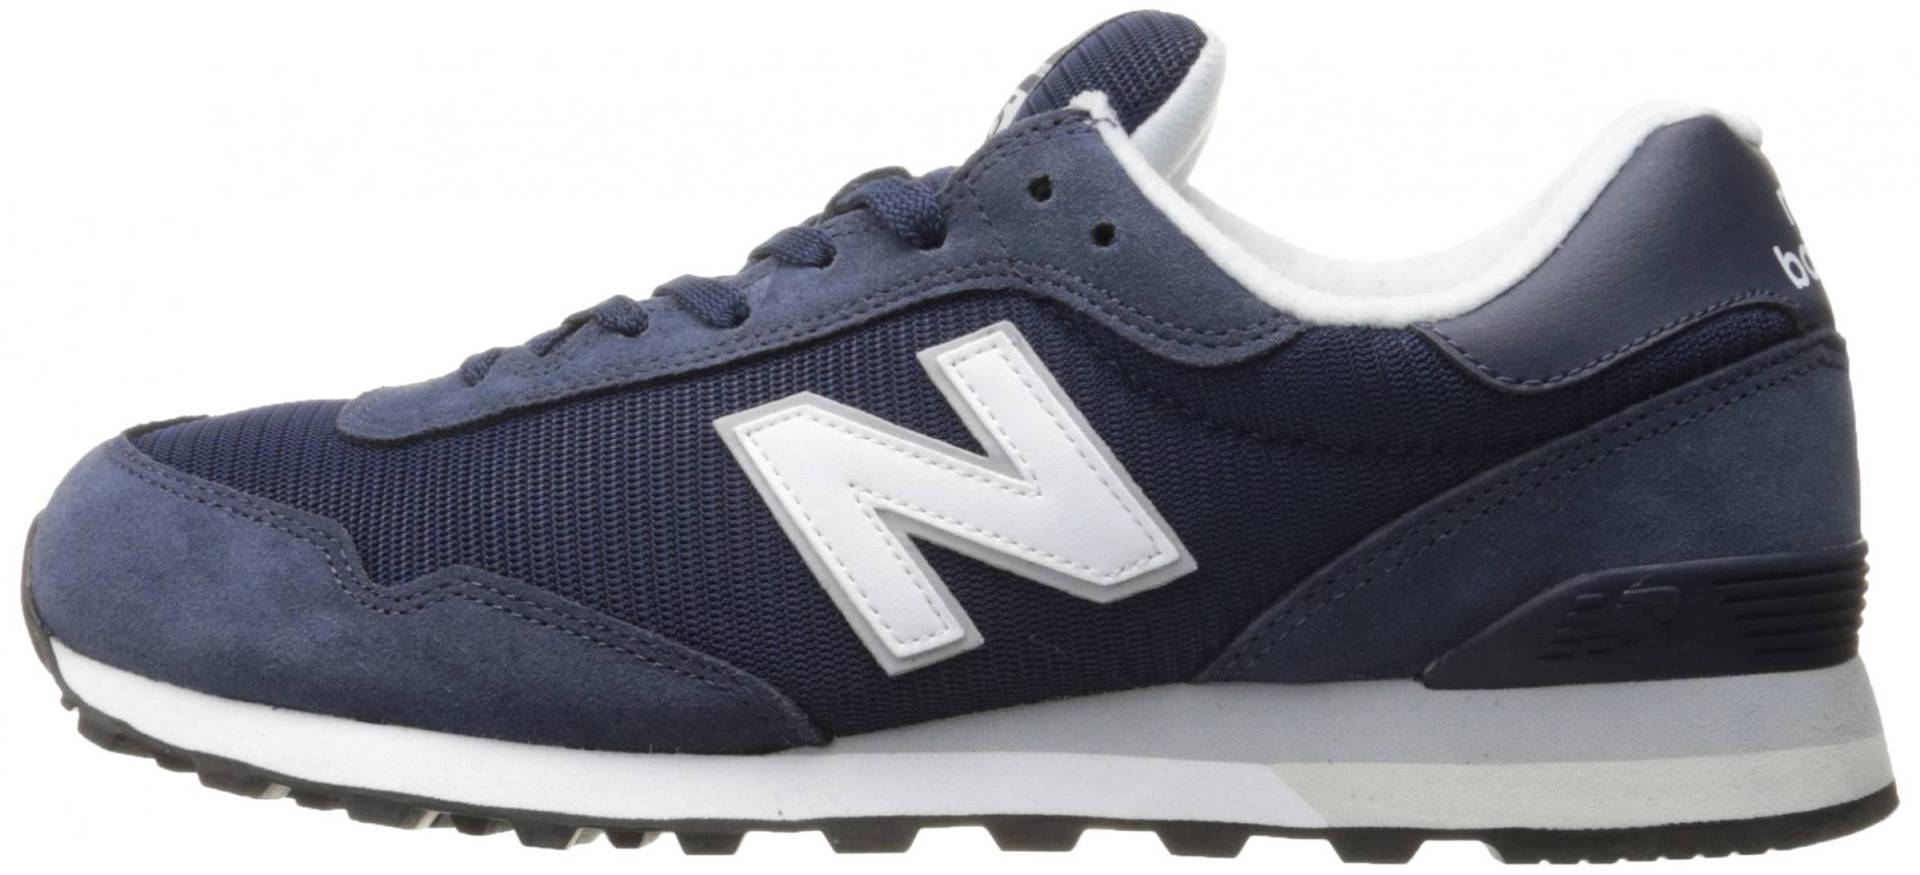 New Balance 515 – Shoes Reviews 